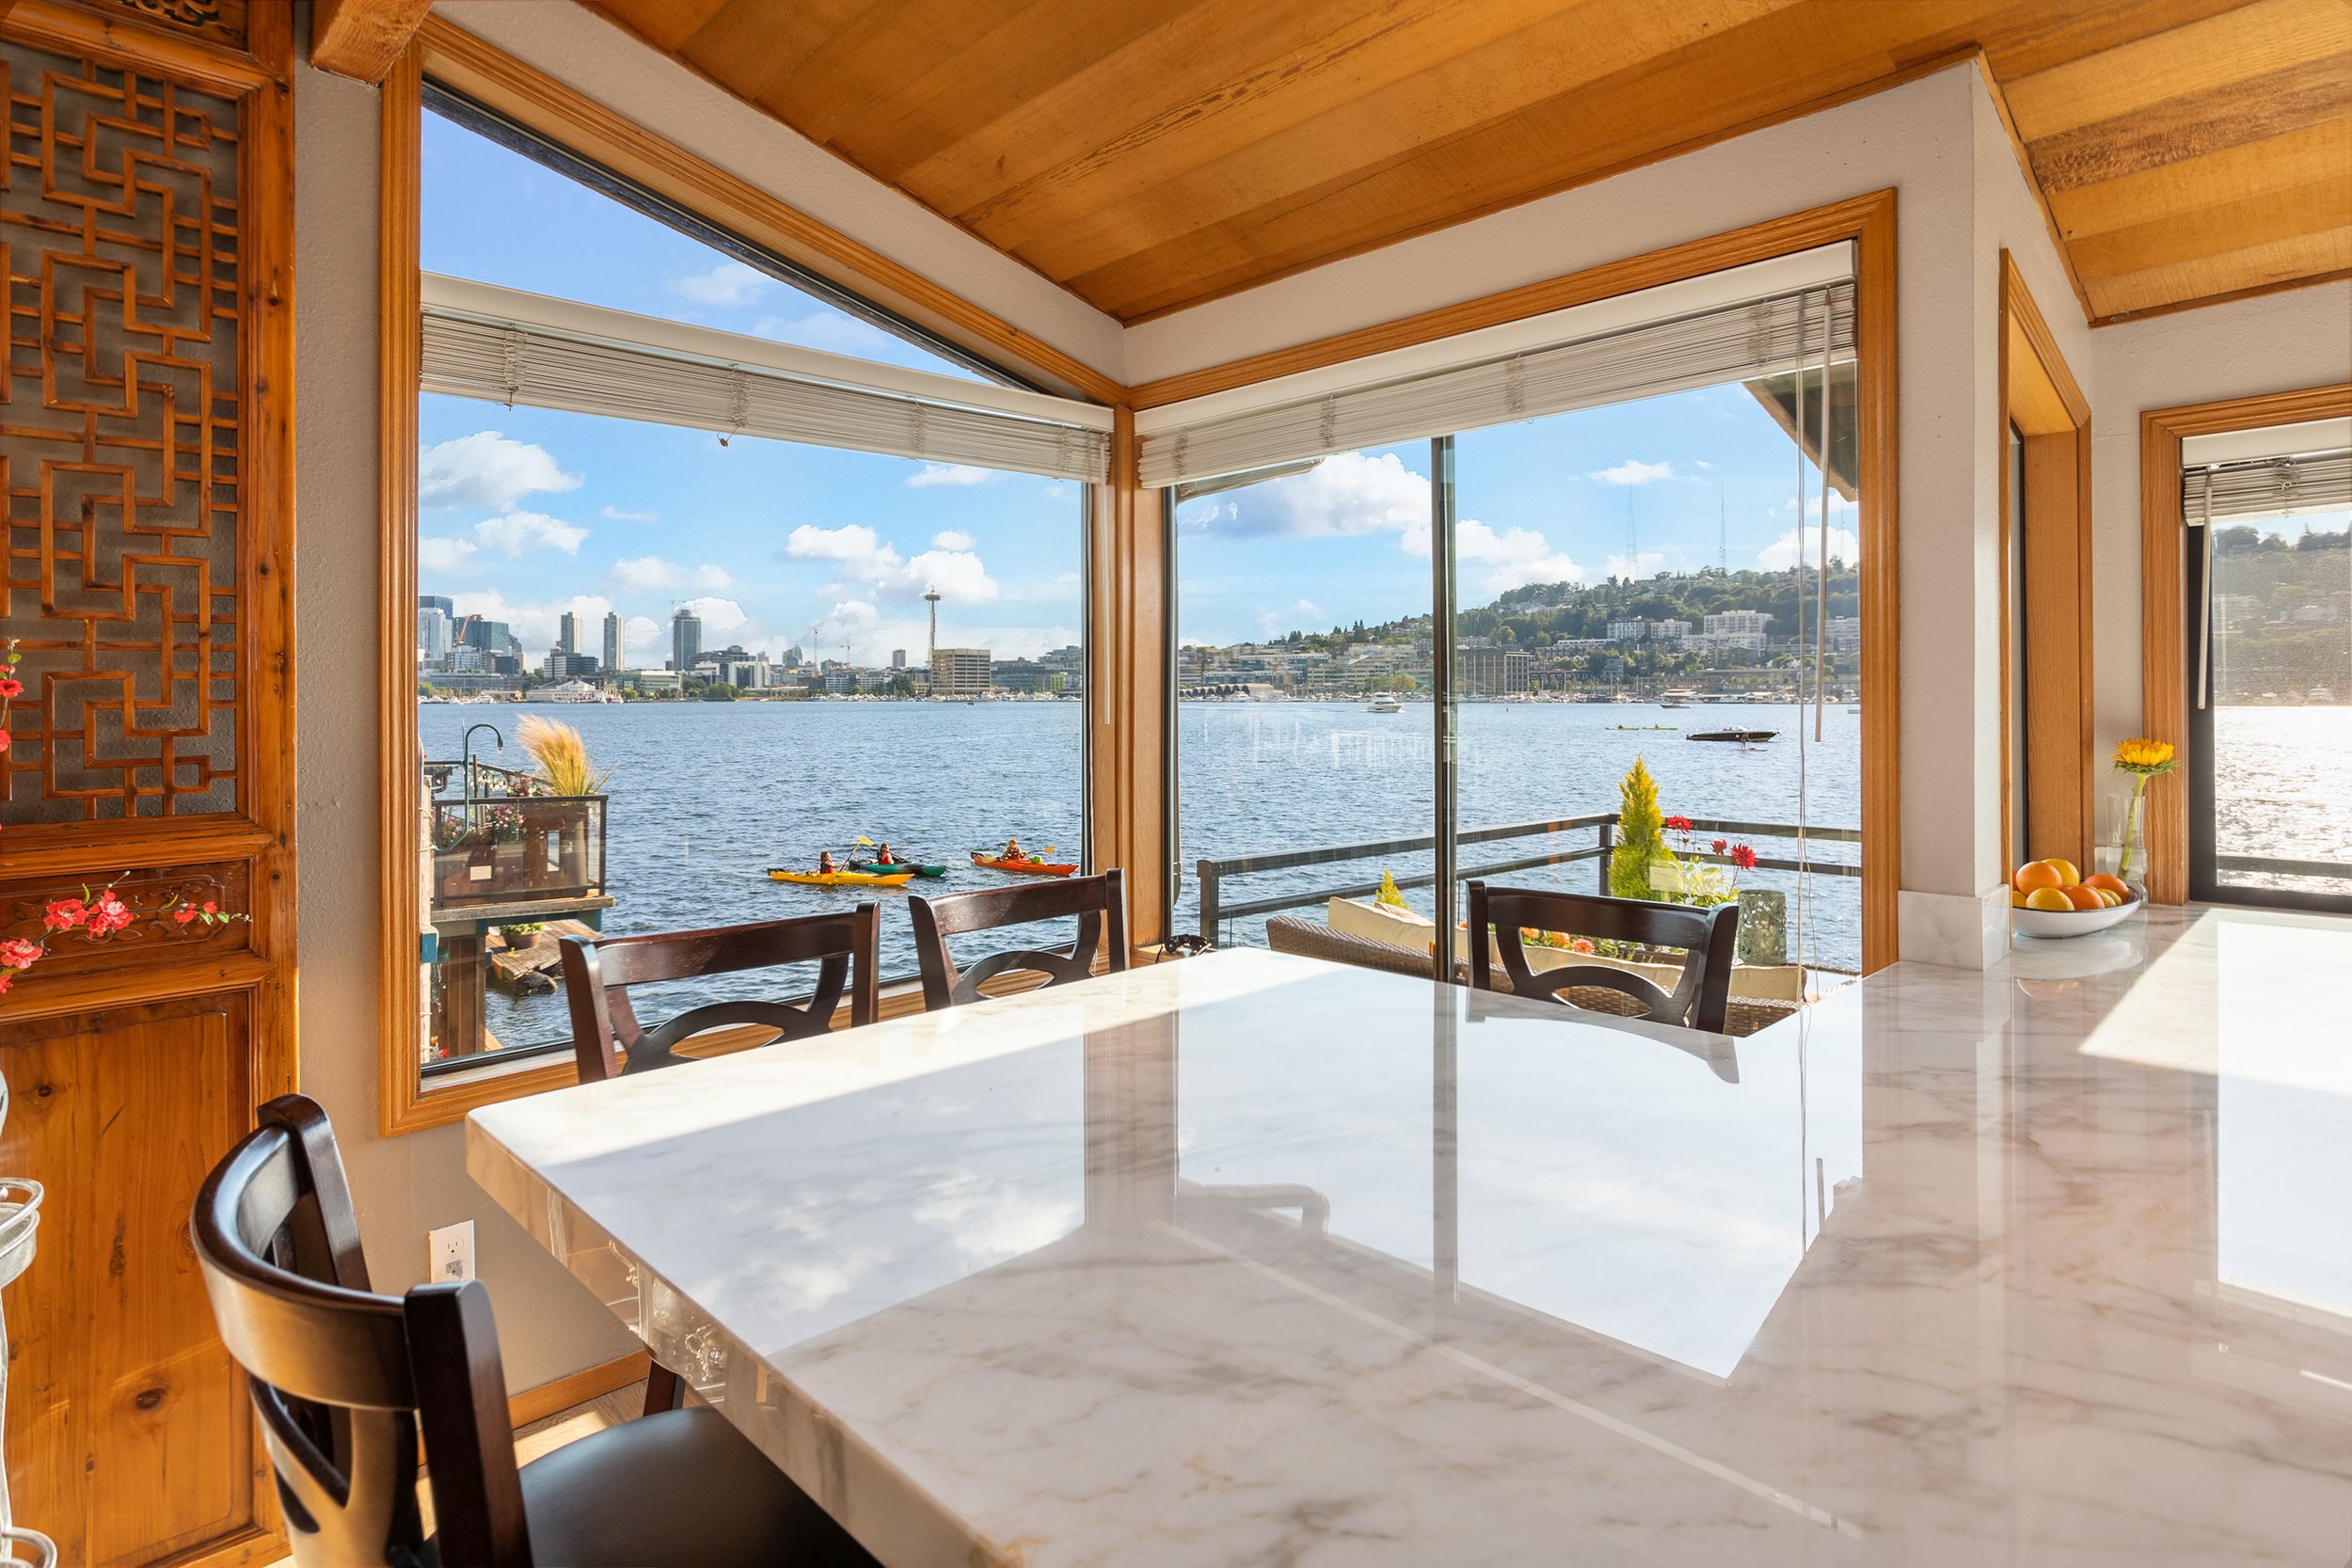 End of dock floating home at the lake union houseboat dock 2031 Fairview ave